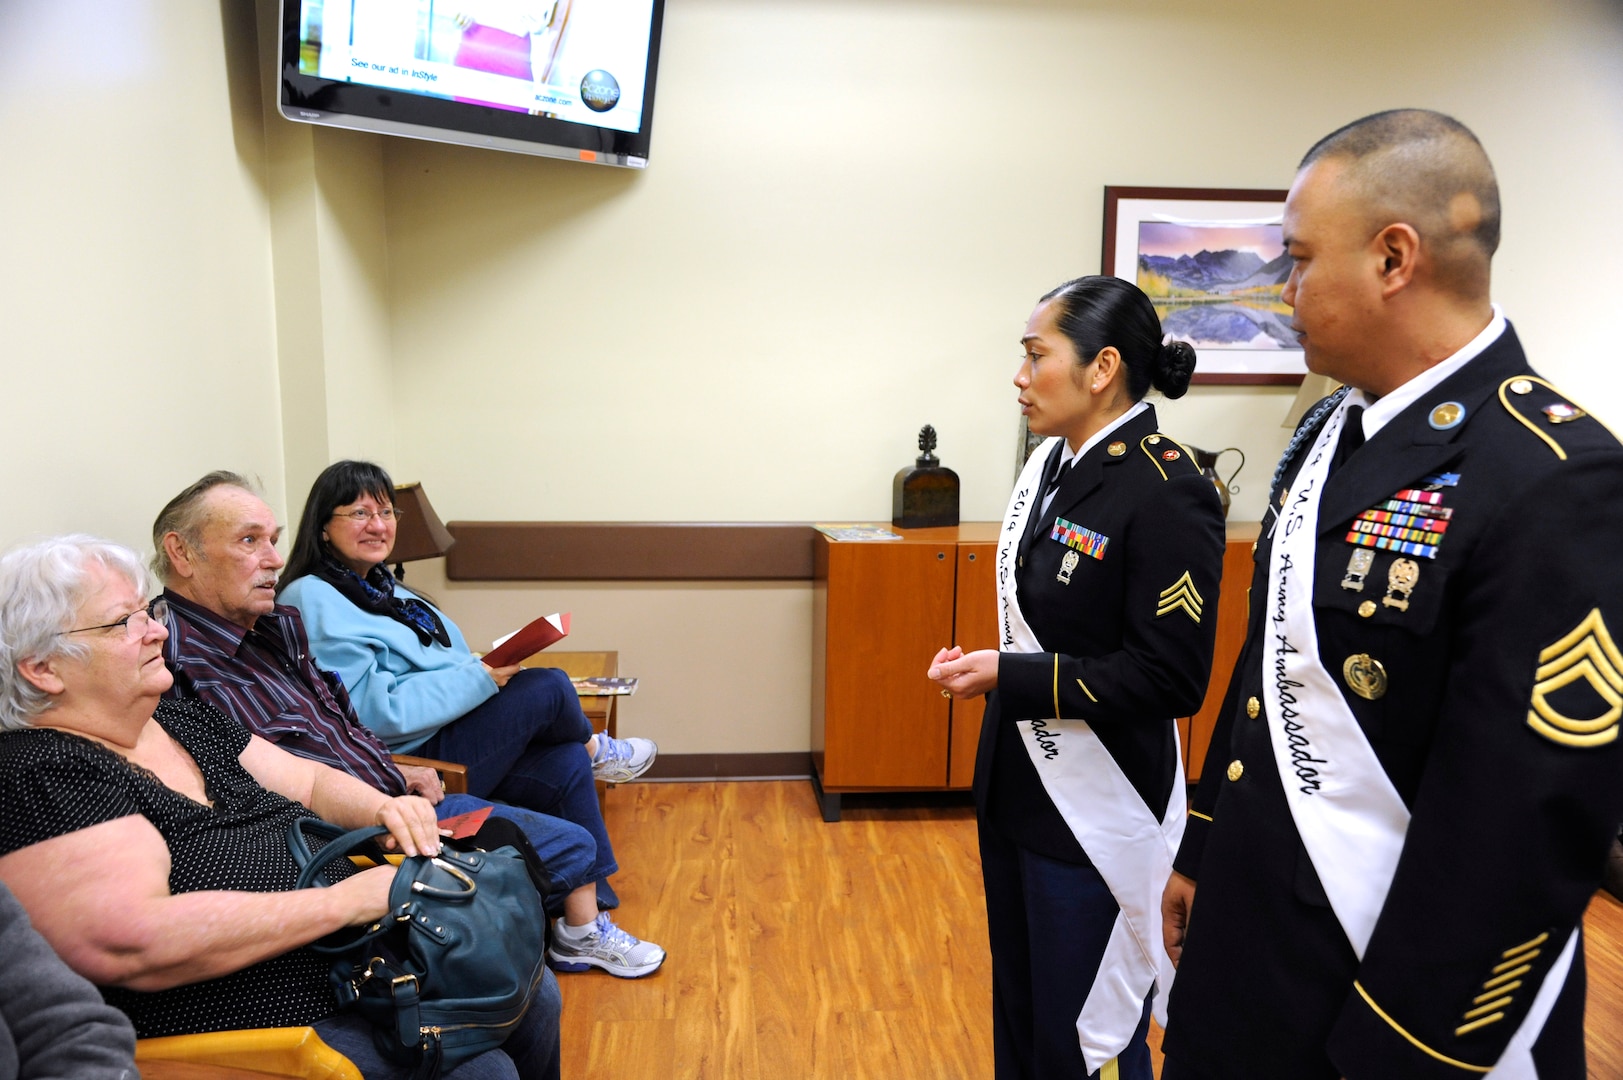 The 2014 Joint Base San Antonio Army military ambassadors present valentine cards to veterans and their family members during the 2014 National Salute to Veteran Patients program Feb. 14 at Audie Murphy VA Hospital in San Antonio. Veterans’ administration facilities across the United States pay tribute to veteran patients annually during this week-long salute. (U.S. Air Force photo by Airman 1st Class Alexandria Slade)